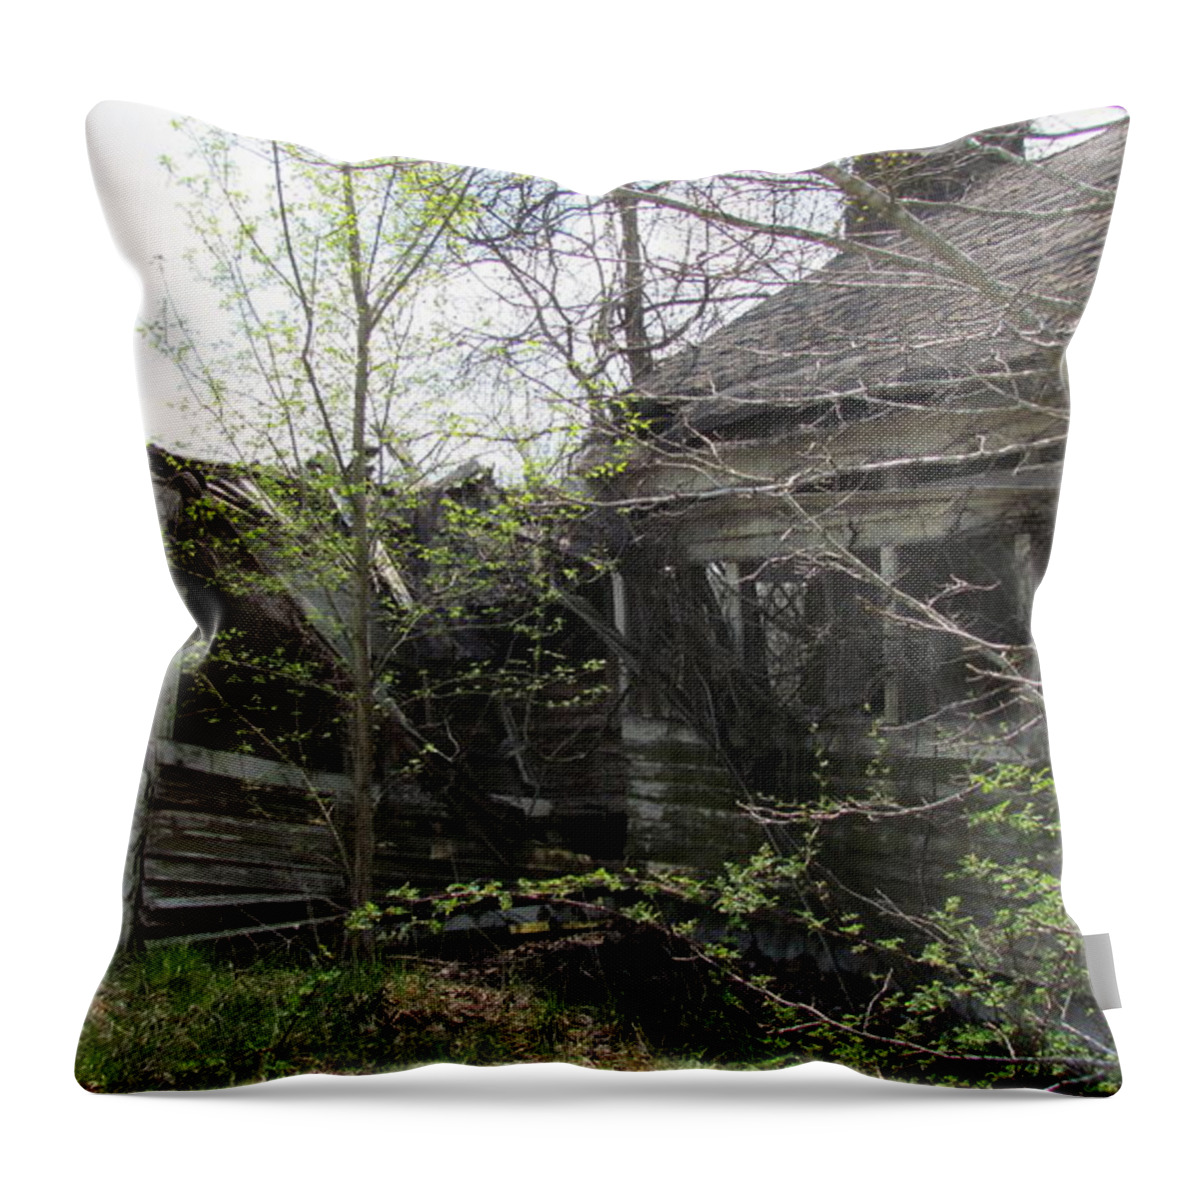 Photography Throw Pillow featuring the photograph The Old Farm House by Shea Holliman